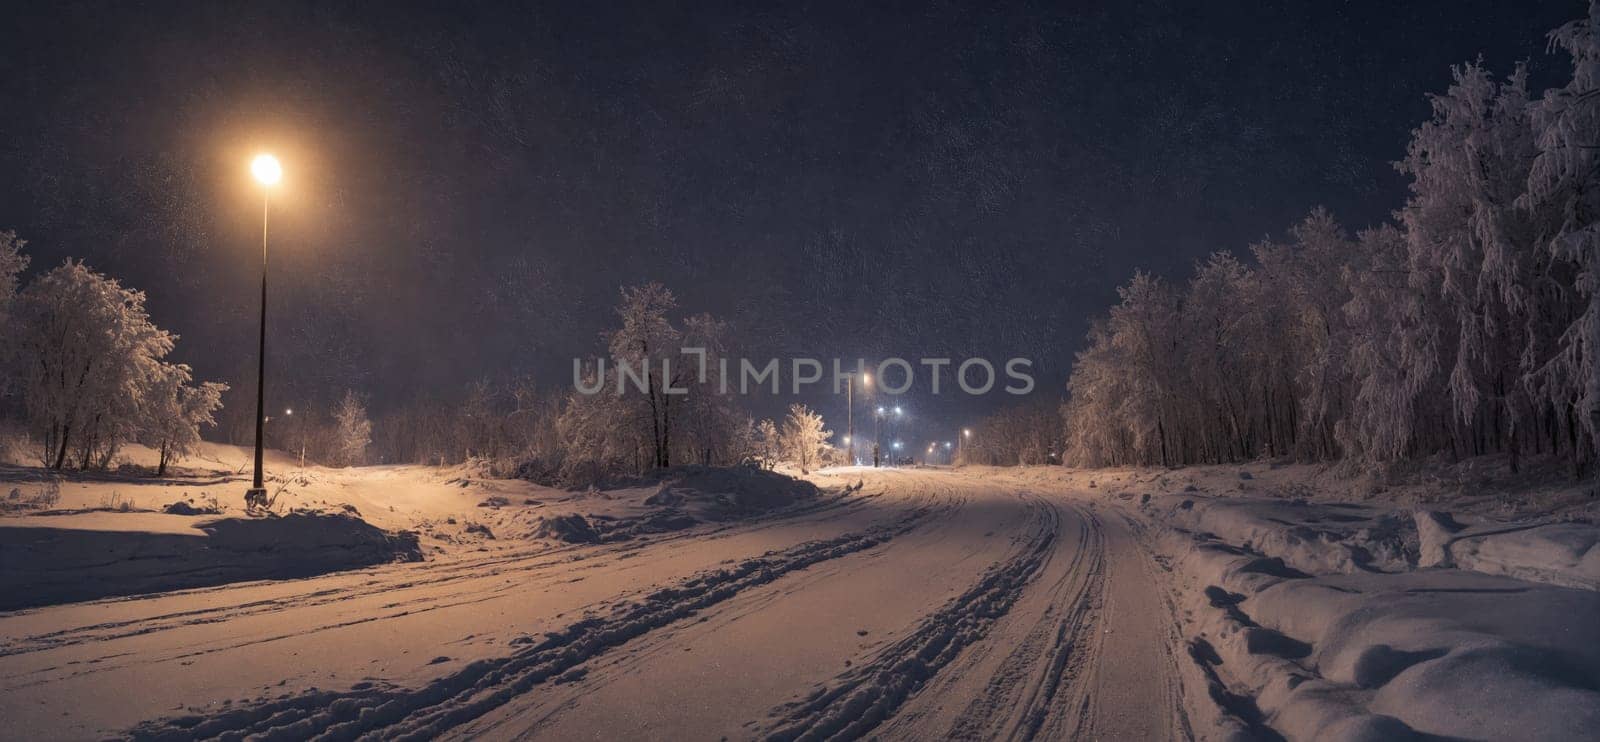 A freezing midnight scene on a snowy road with a street light in the background by Andre1ns